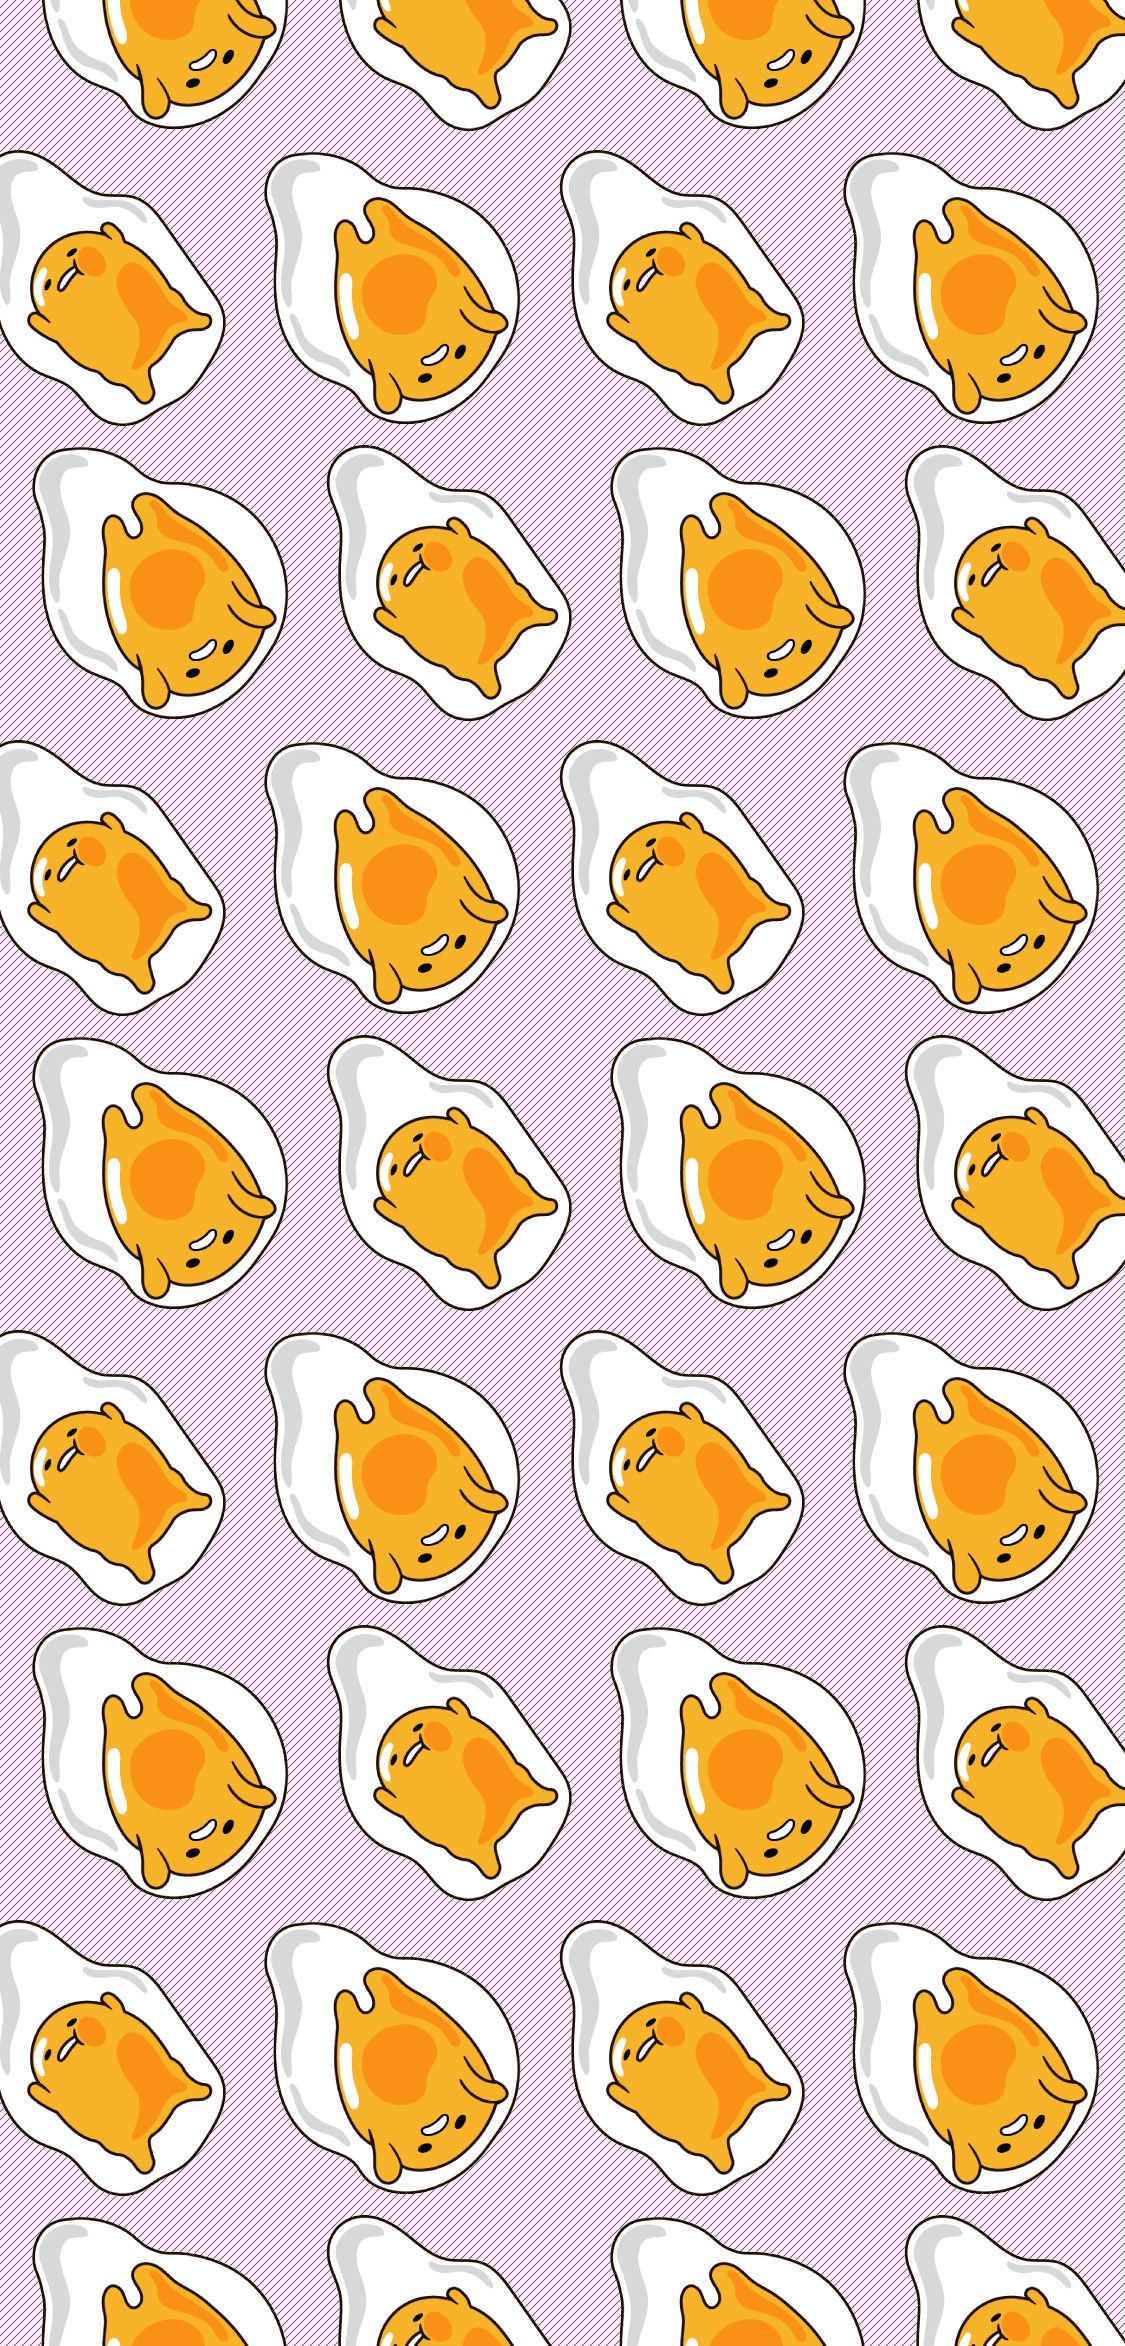 A pattern of eggs on purple background - Egg